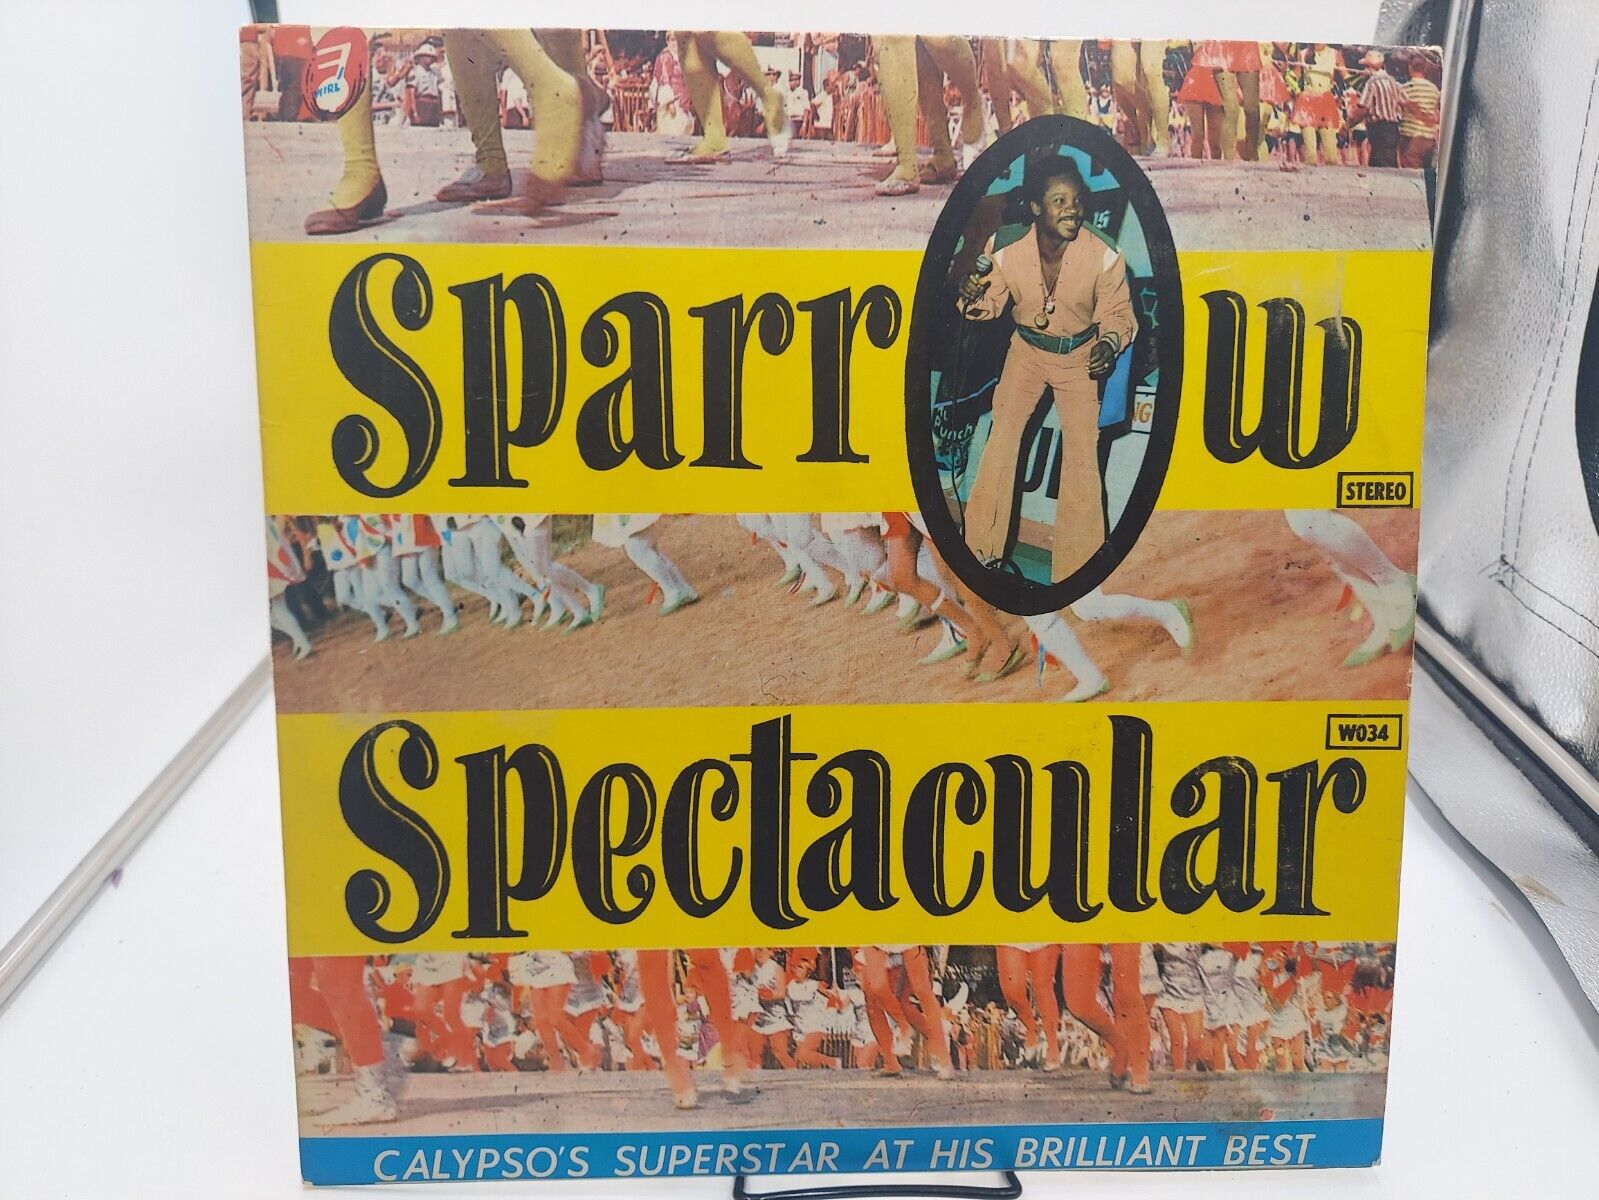 Mighty Sparrow Spectacular LP Record 1973 Wirl 034 Trinidad Ultrasonic Clean VG+